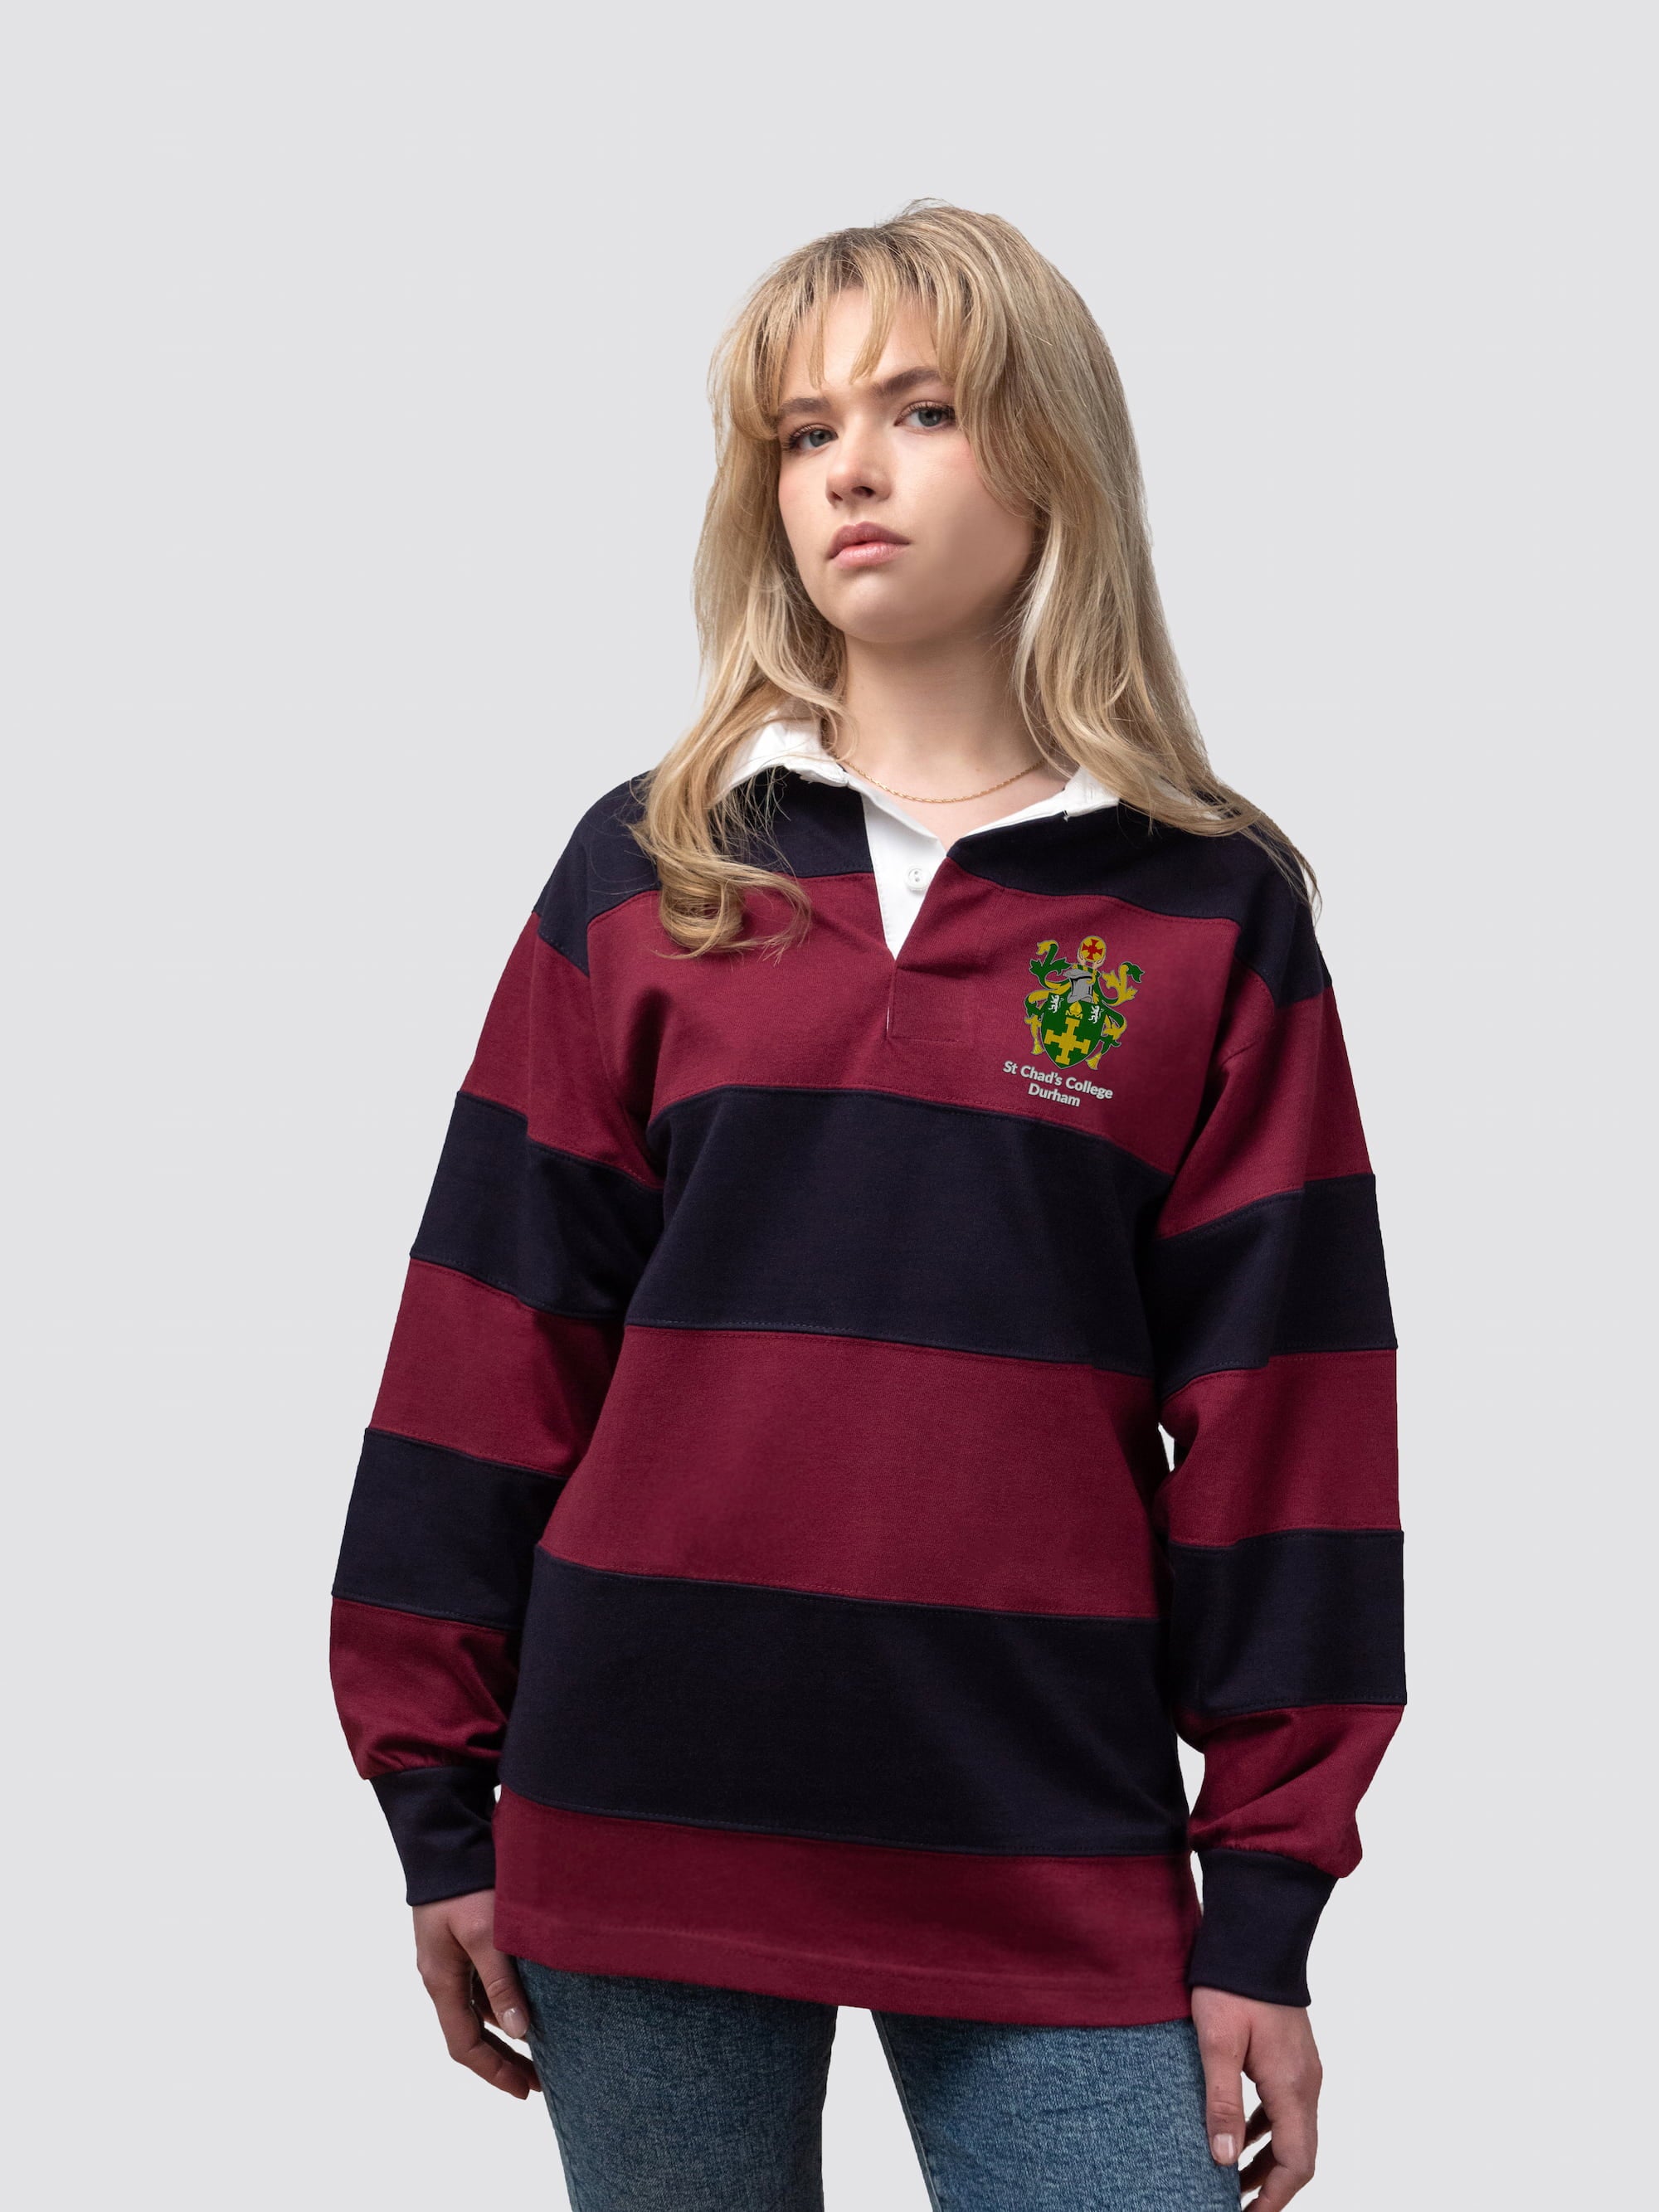 St Chad's College rugby shirt, with burgundy and navy stripes